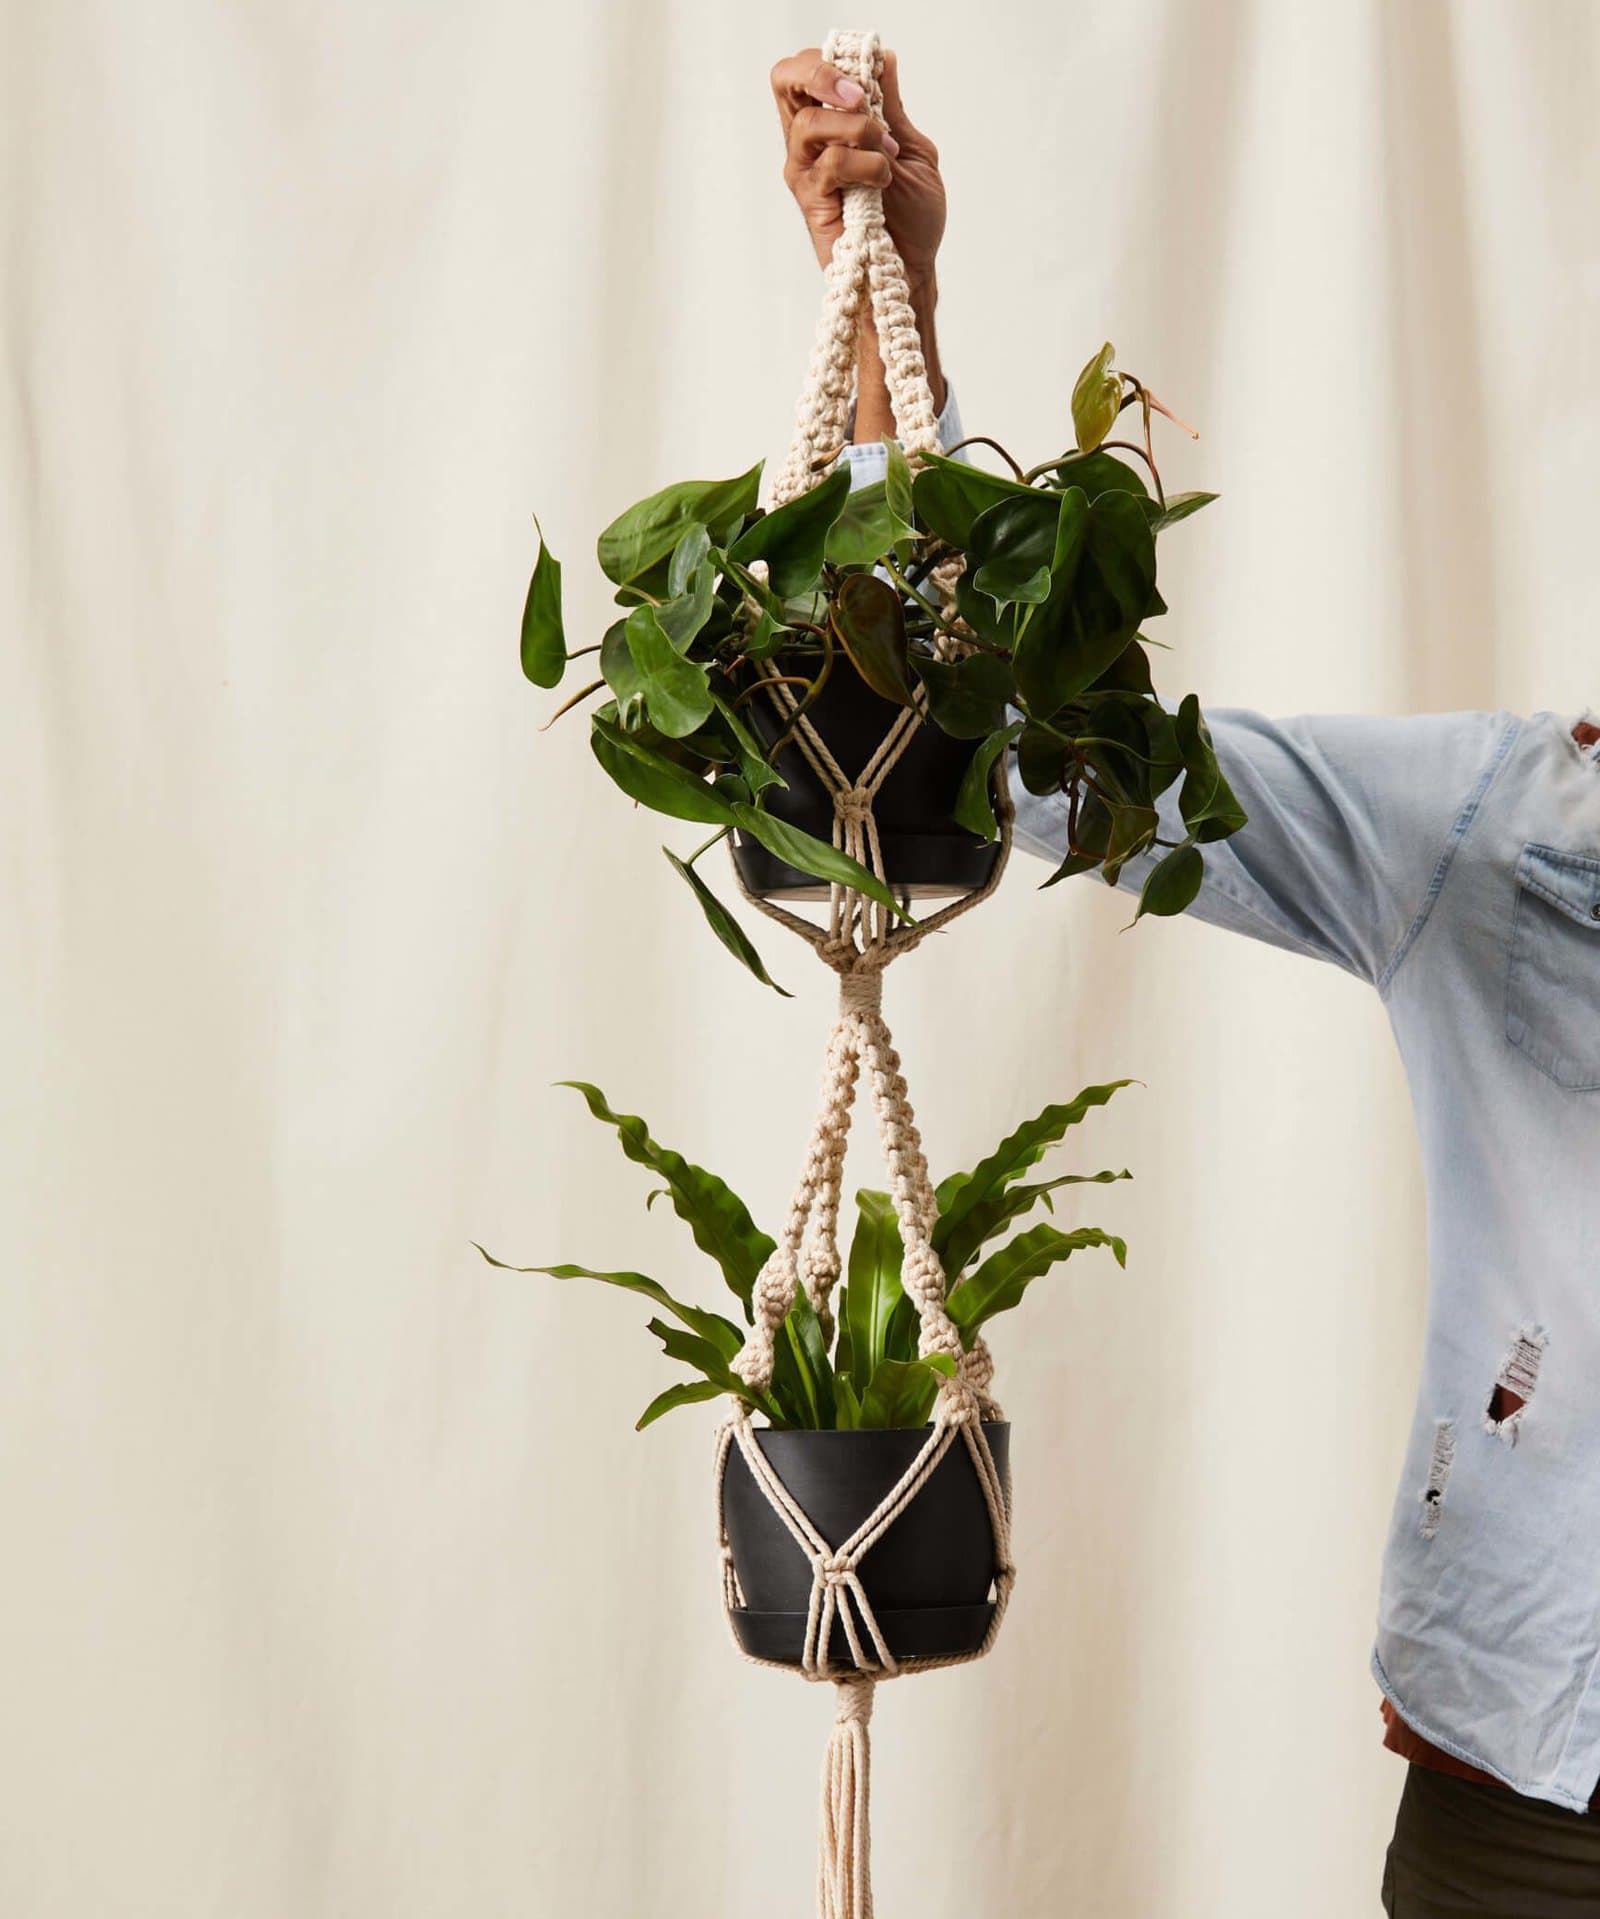 Display Plants with a Macrame Hanger